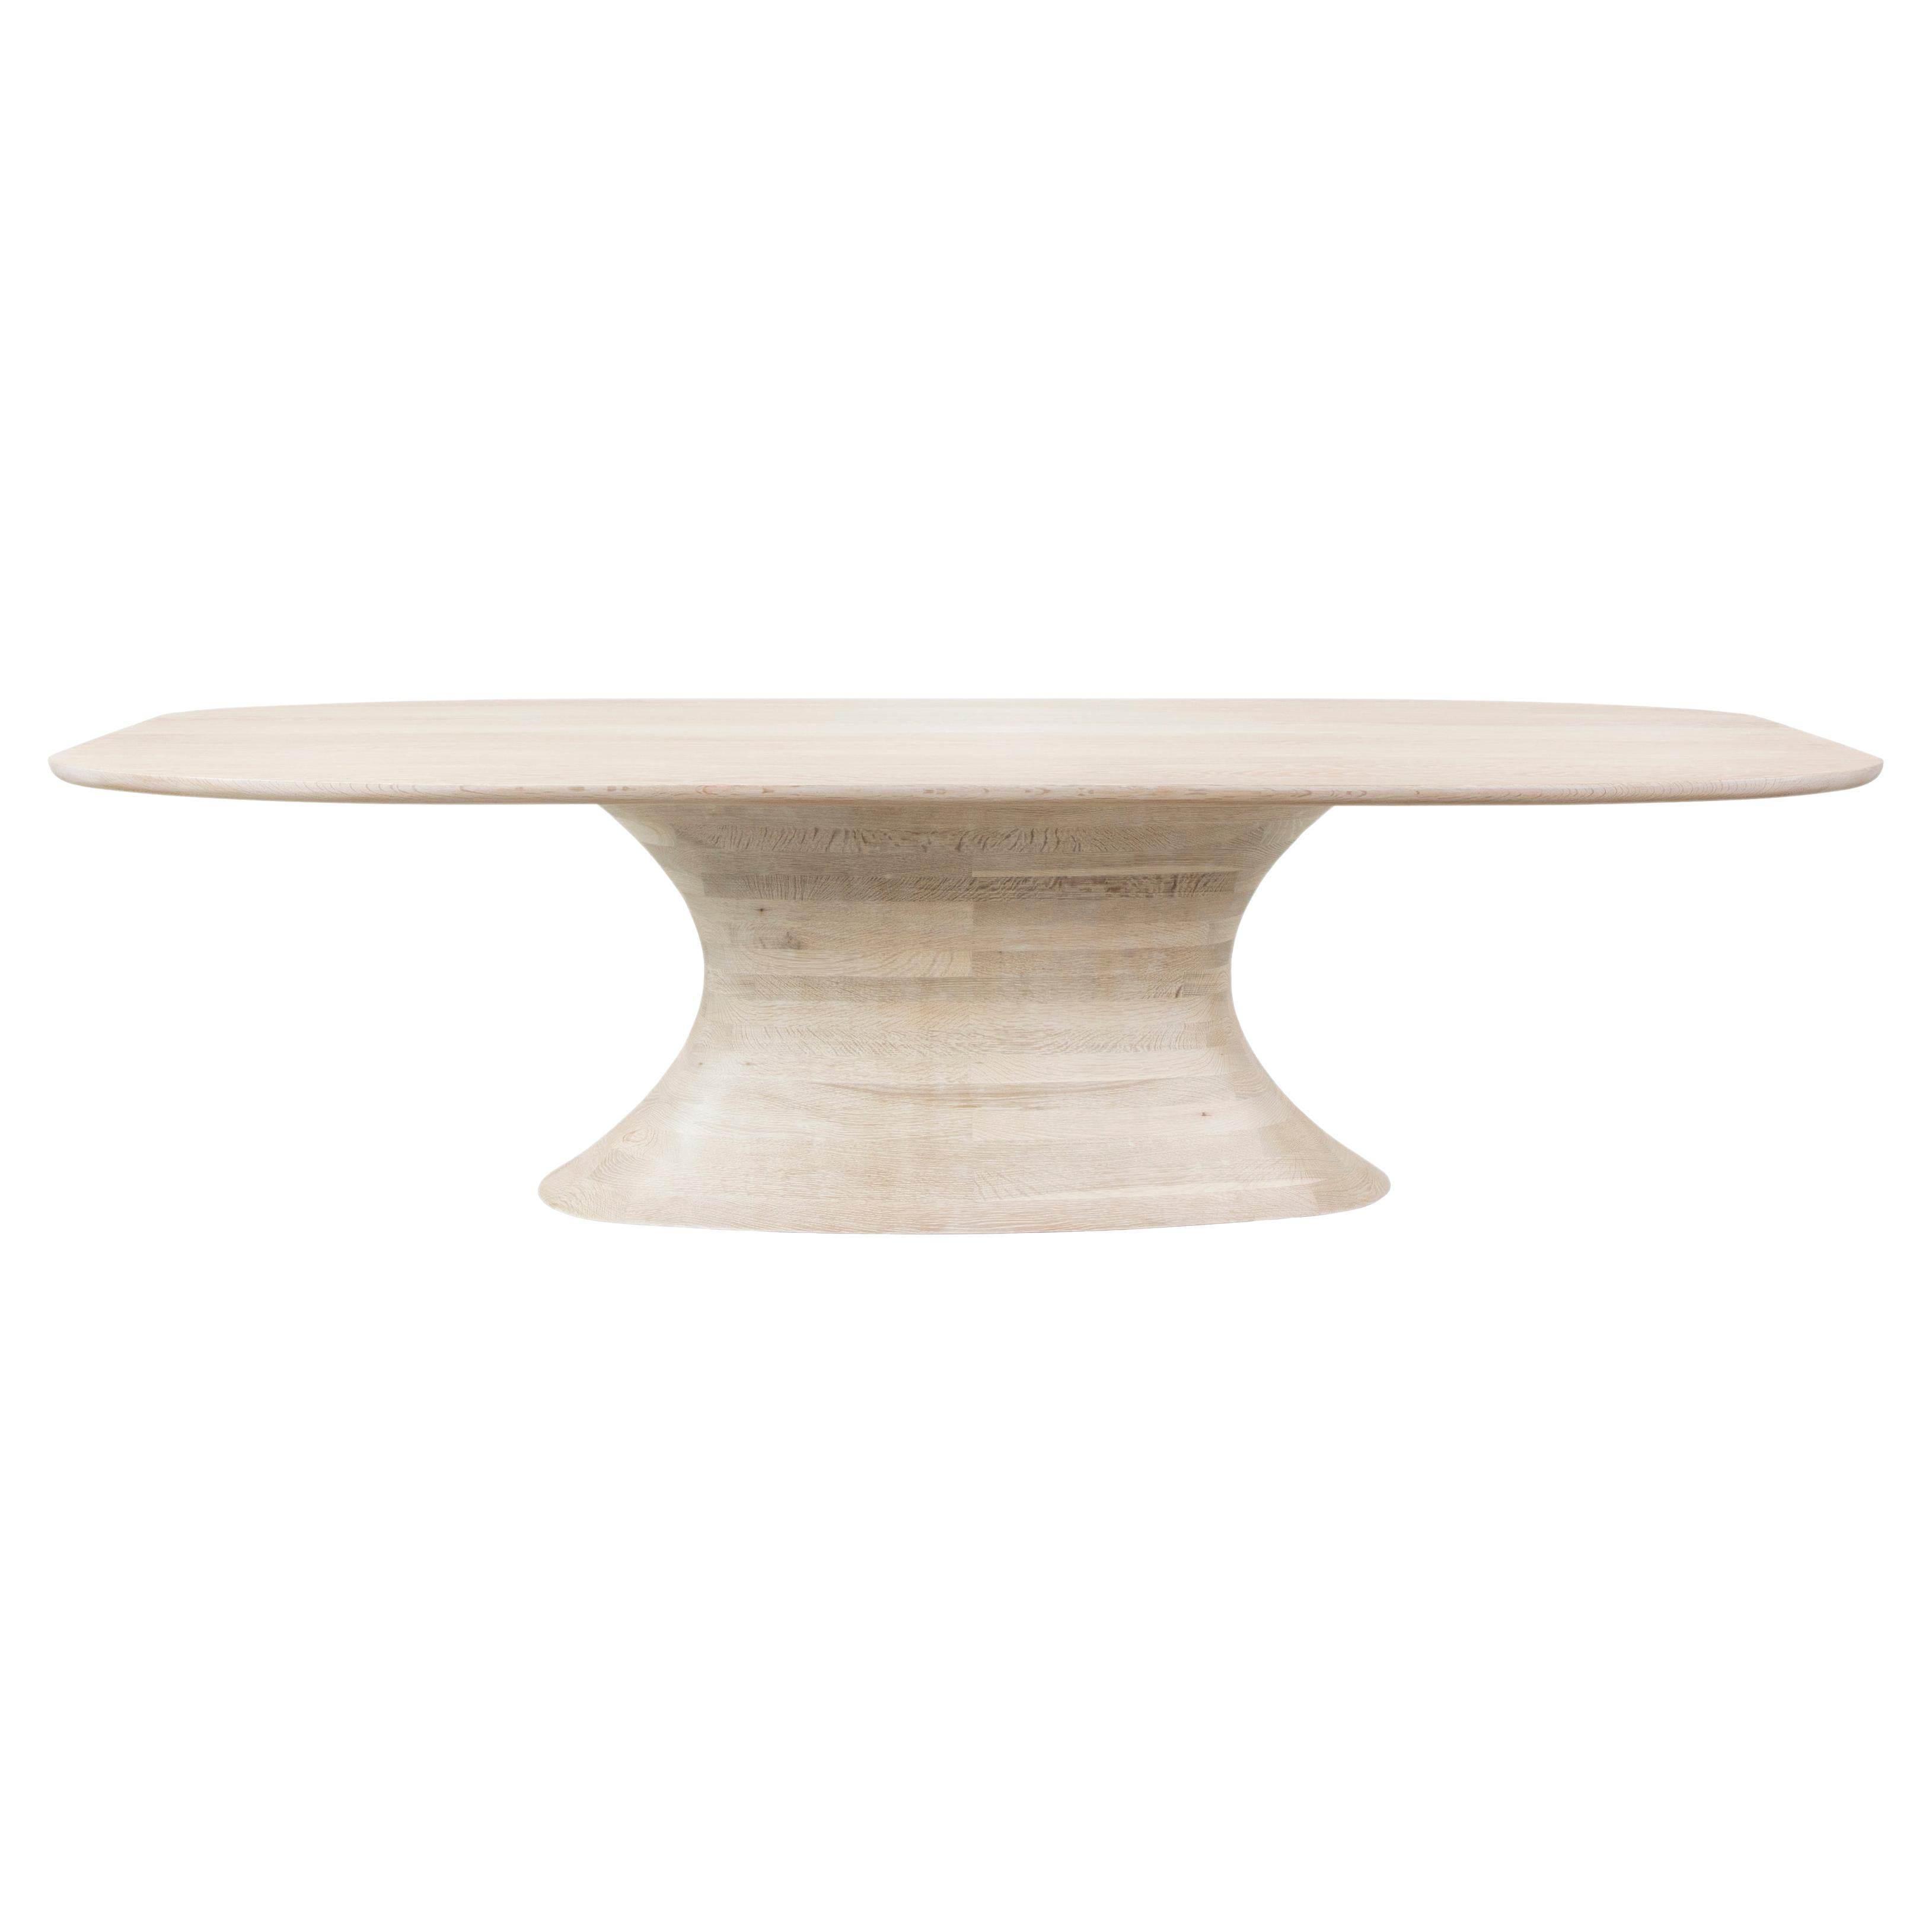 CONCAVE Statement Dining Table in White Oak For Sale at 1stDibs